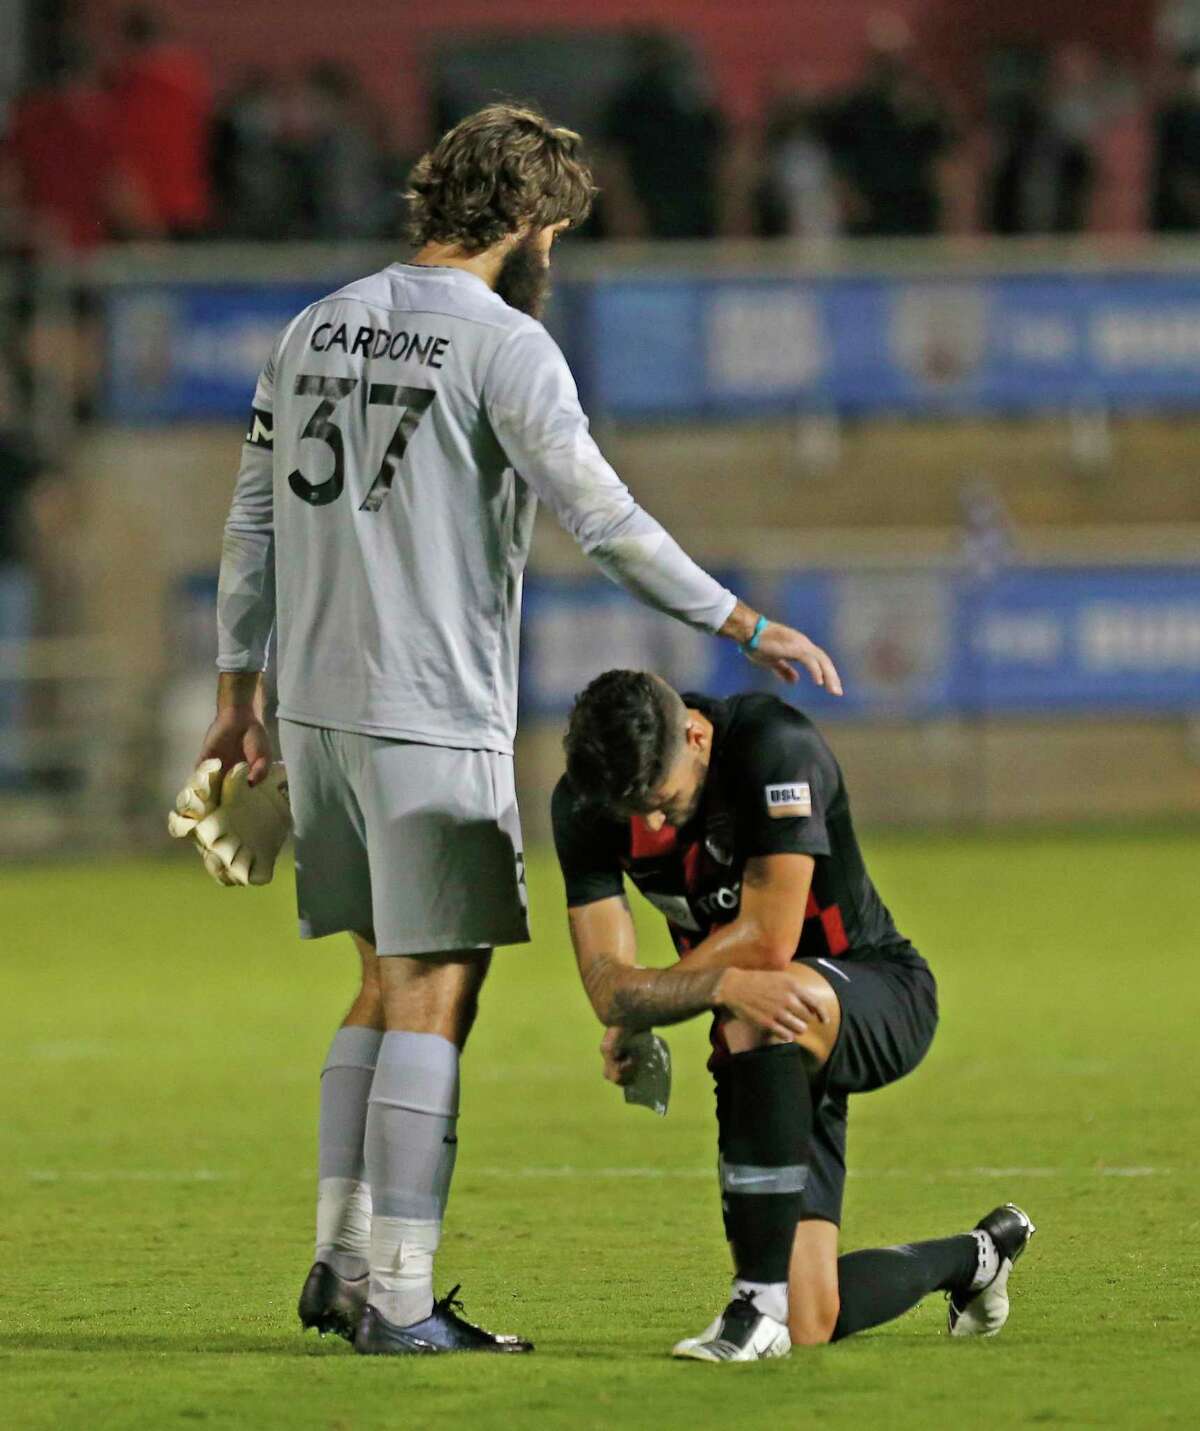 SAFC goalie Matthew Cardone consoles SAFC Mitchell Taintor after they lost in OT 1-0. San Antonio FC vs. New Mexico United in Western Conference Quarterfinal match on Saturday, October 10, 2020 at Toyota Field.